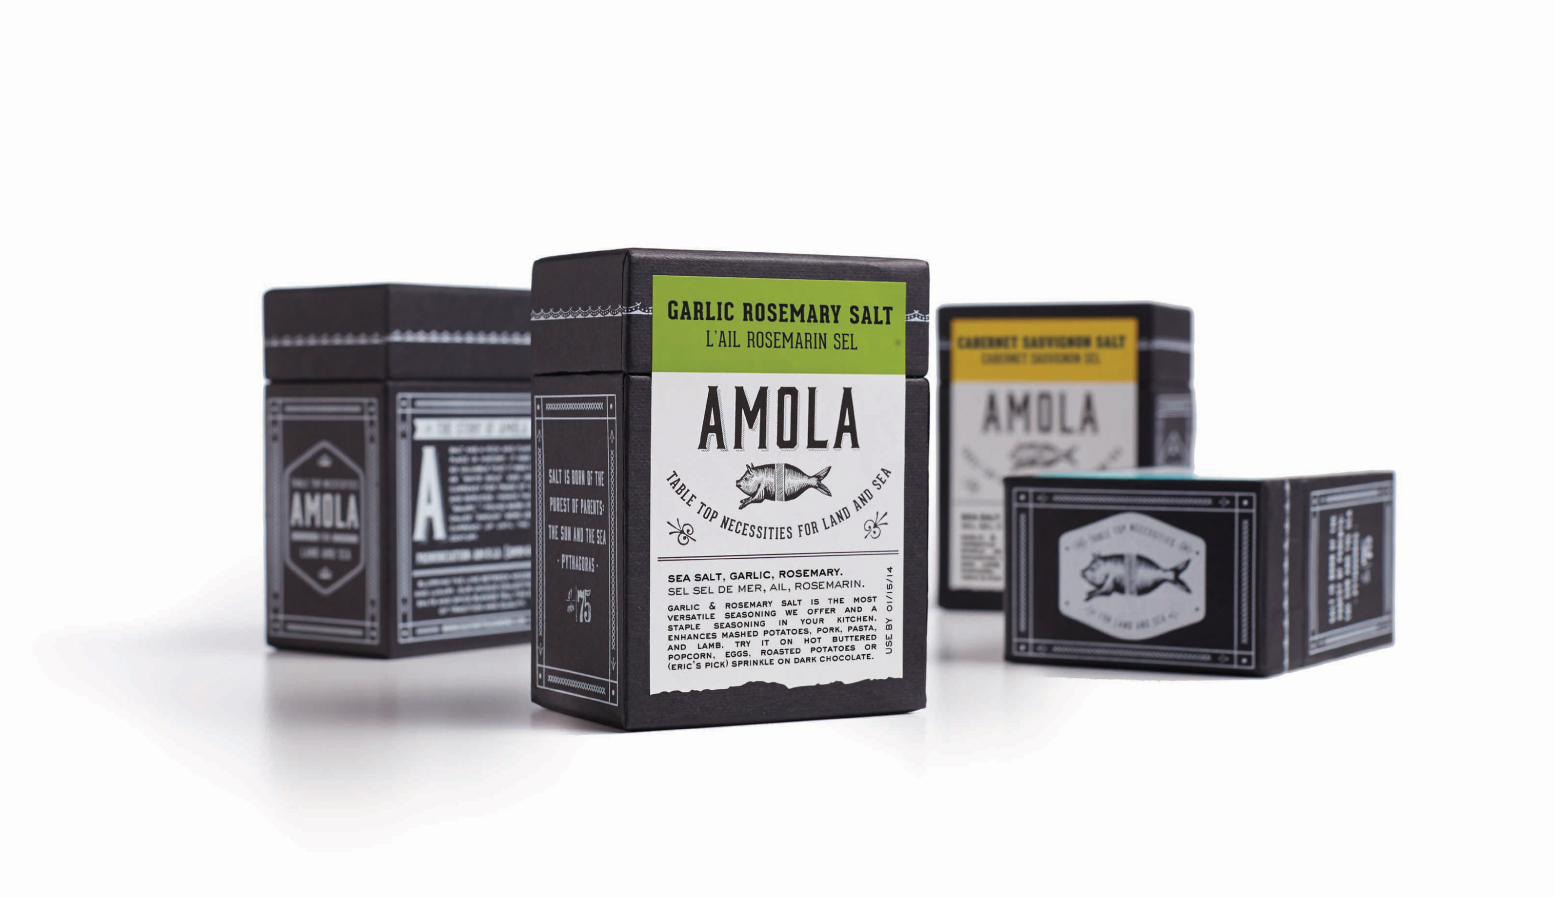 Branding and packaging design for Amola.